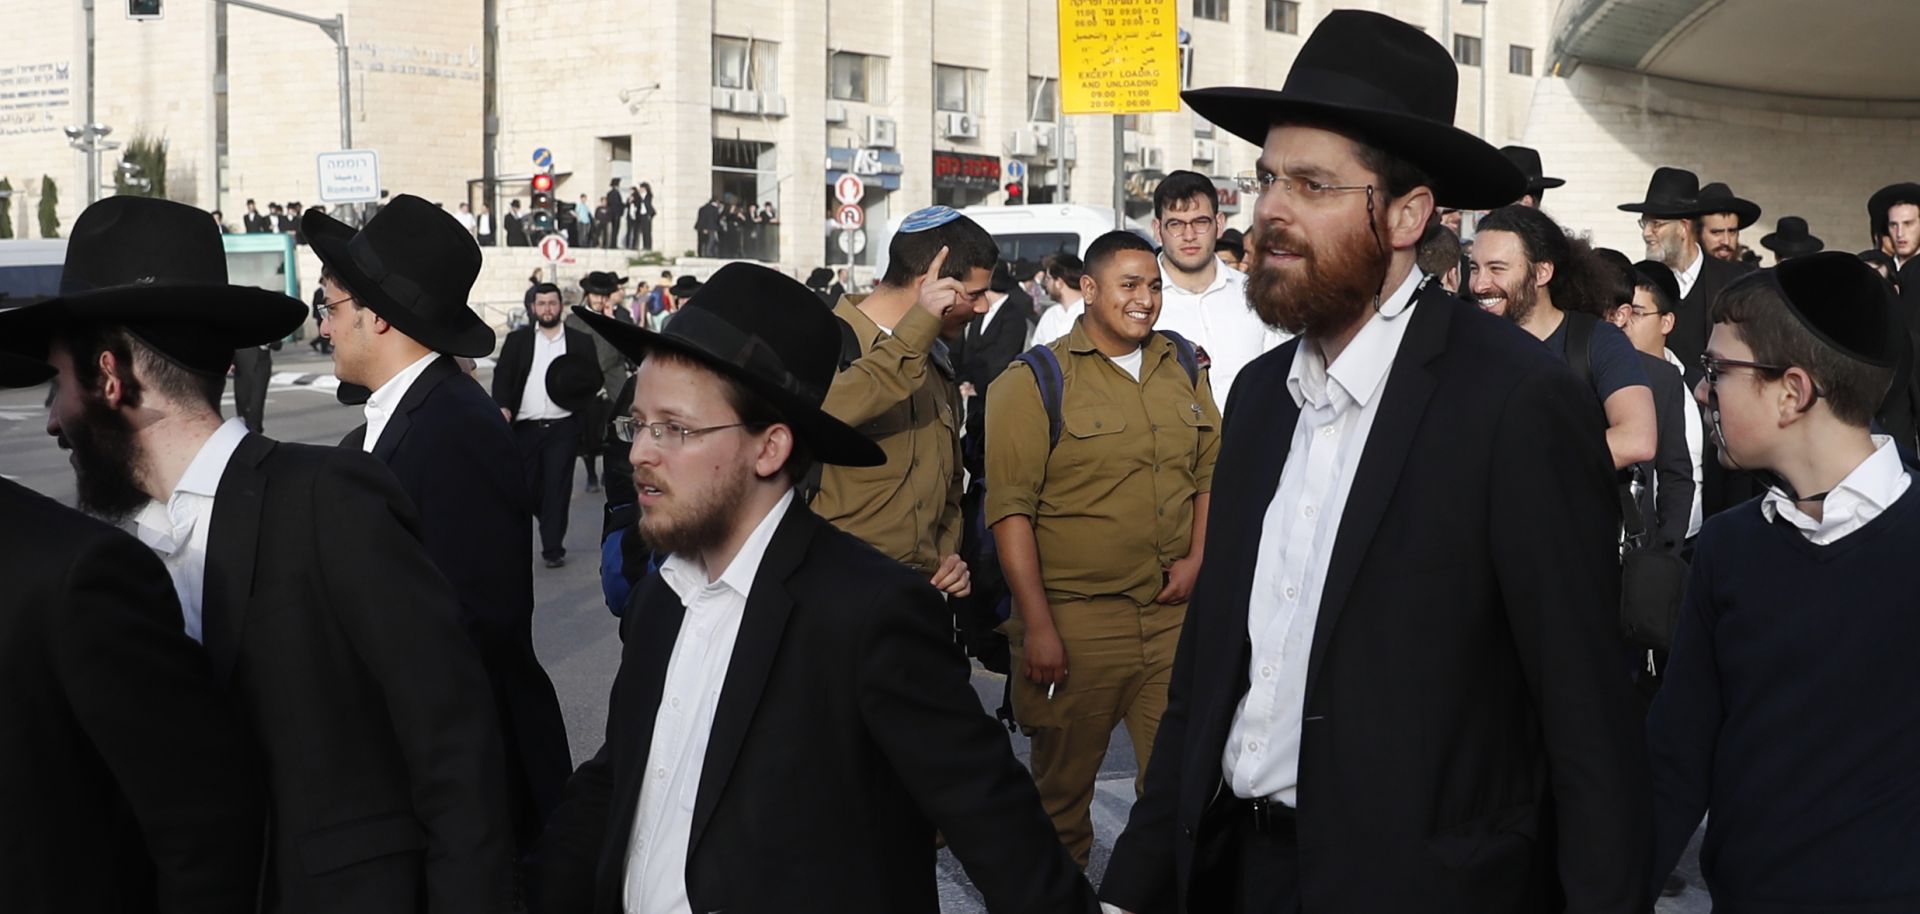 Israeli ultra-Orthodox Jewish men block a road as they take part in a demonstration against army conscription on March 8, 2018 in Jerusalem. 